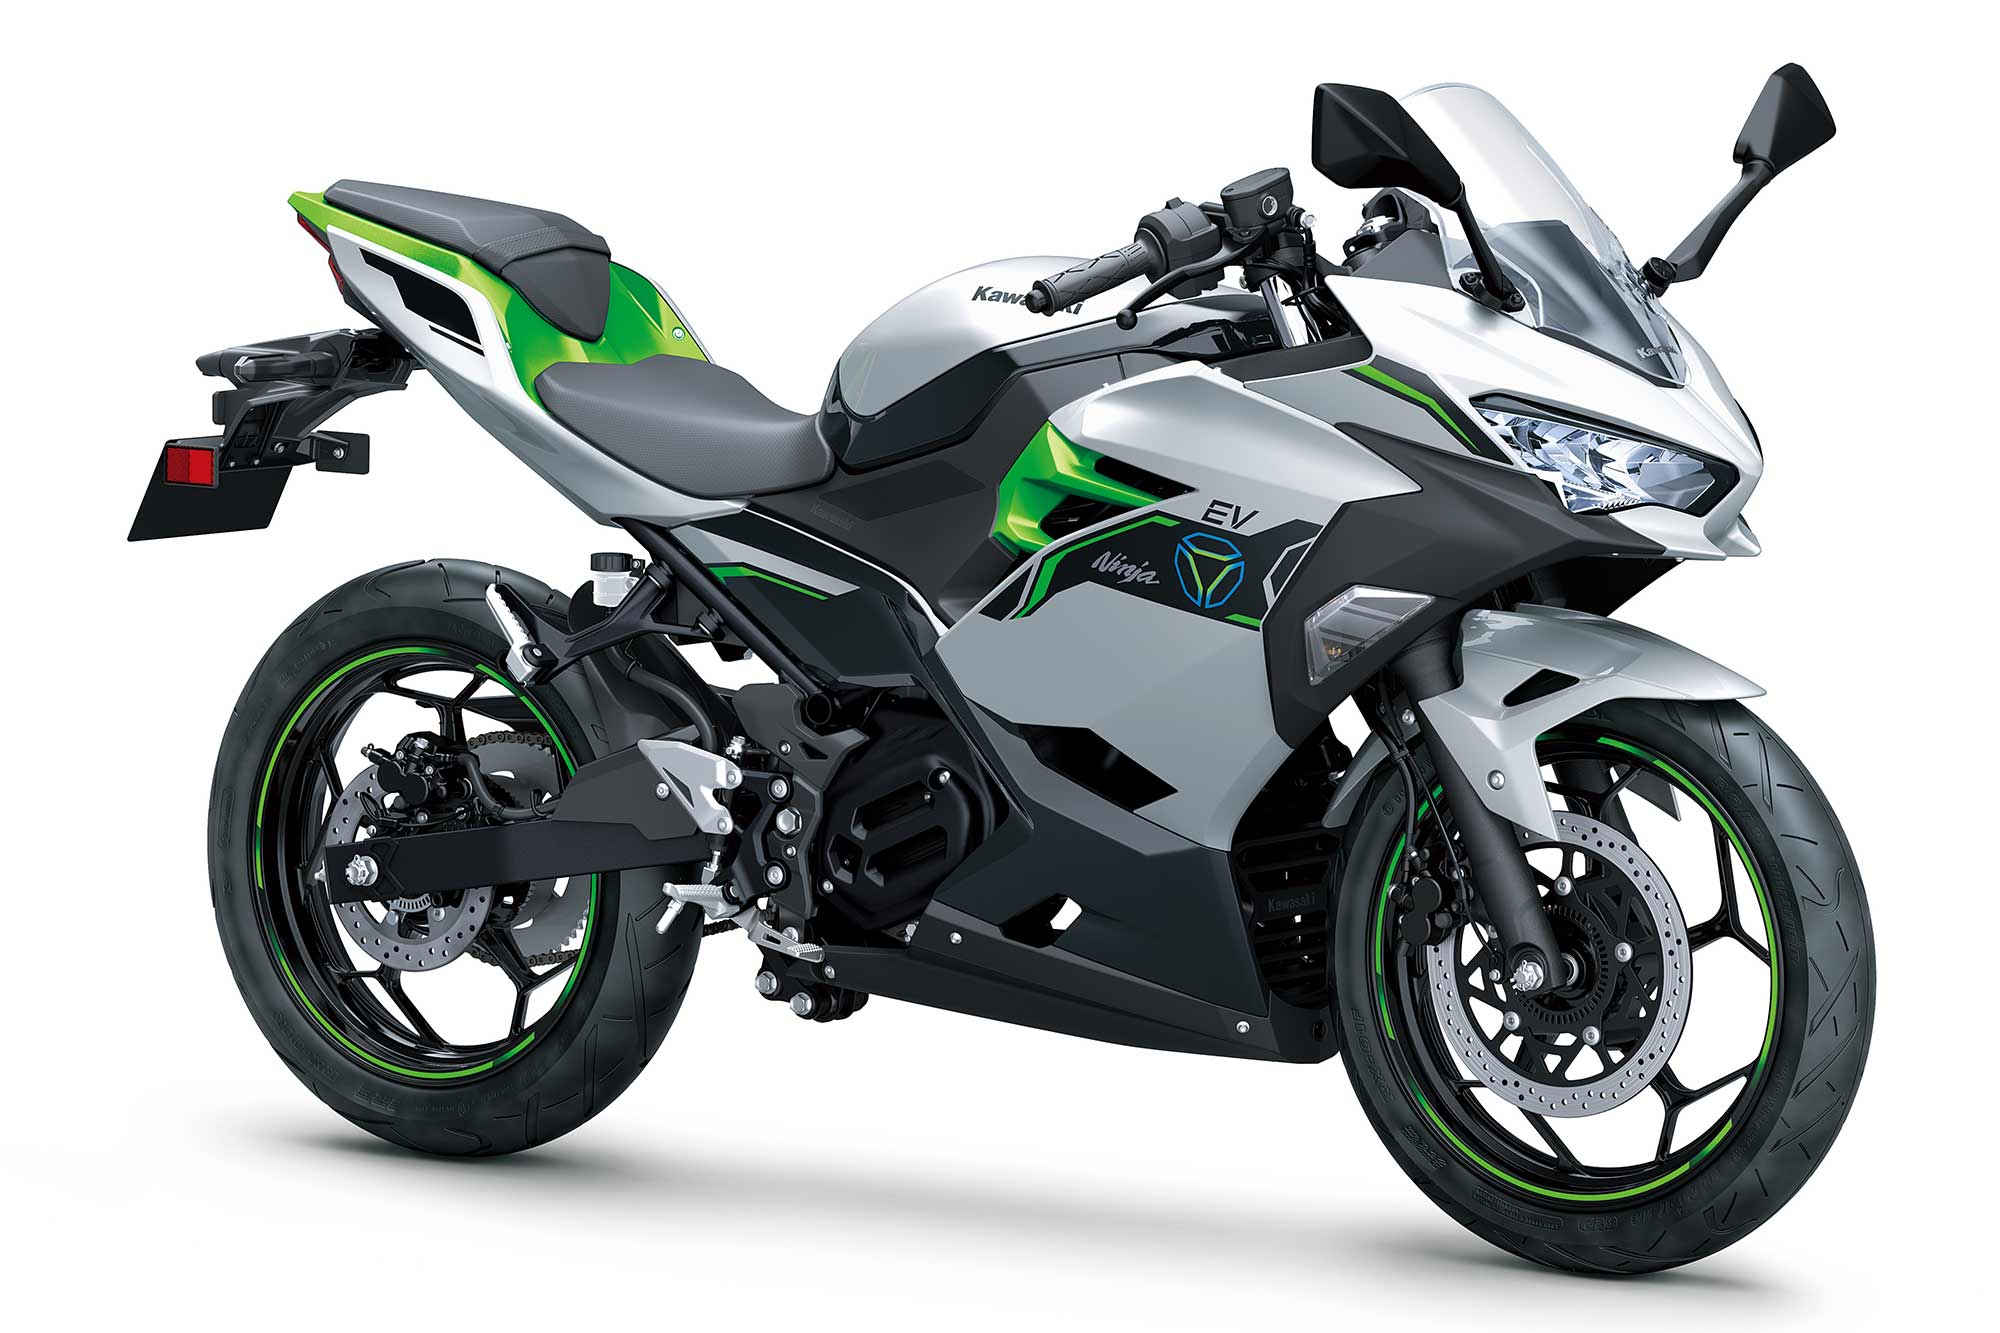 There will be two styles of motorcycles in Kawasaki’s initial electric range. This is the faired Ninja-style model.